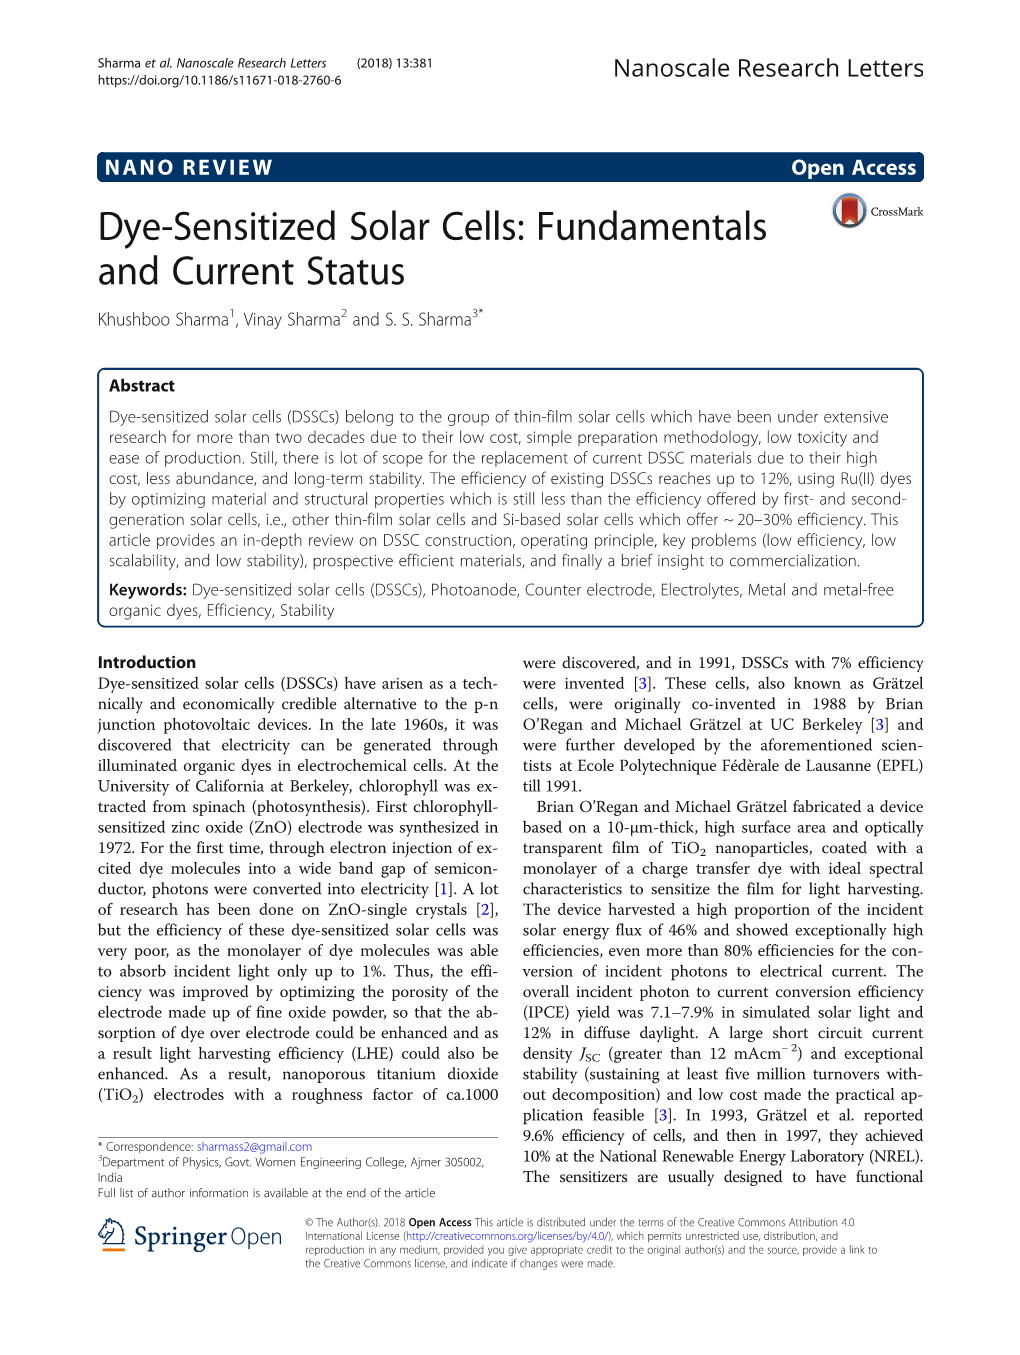 Dye-Sensitized Solar Cells: Fundamentals and Current Status Khushboo Sharma1, Vinay Sharma2 and S